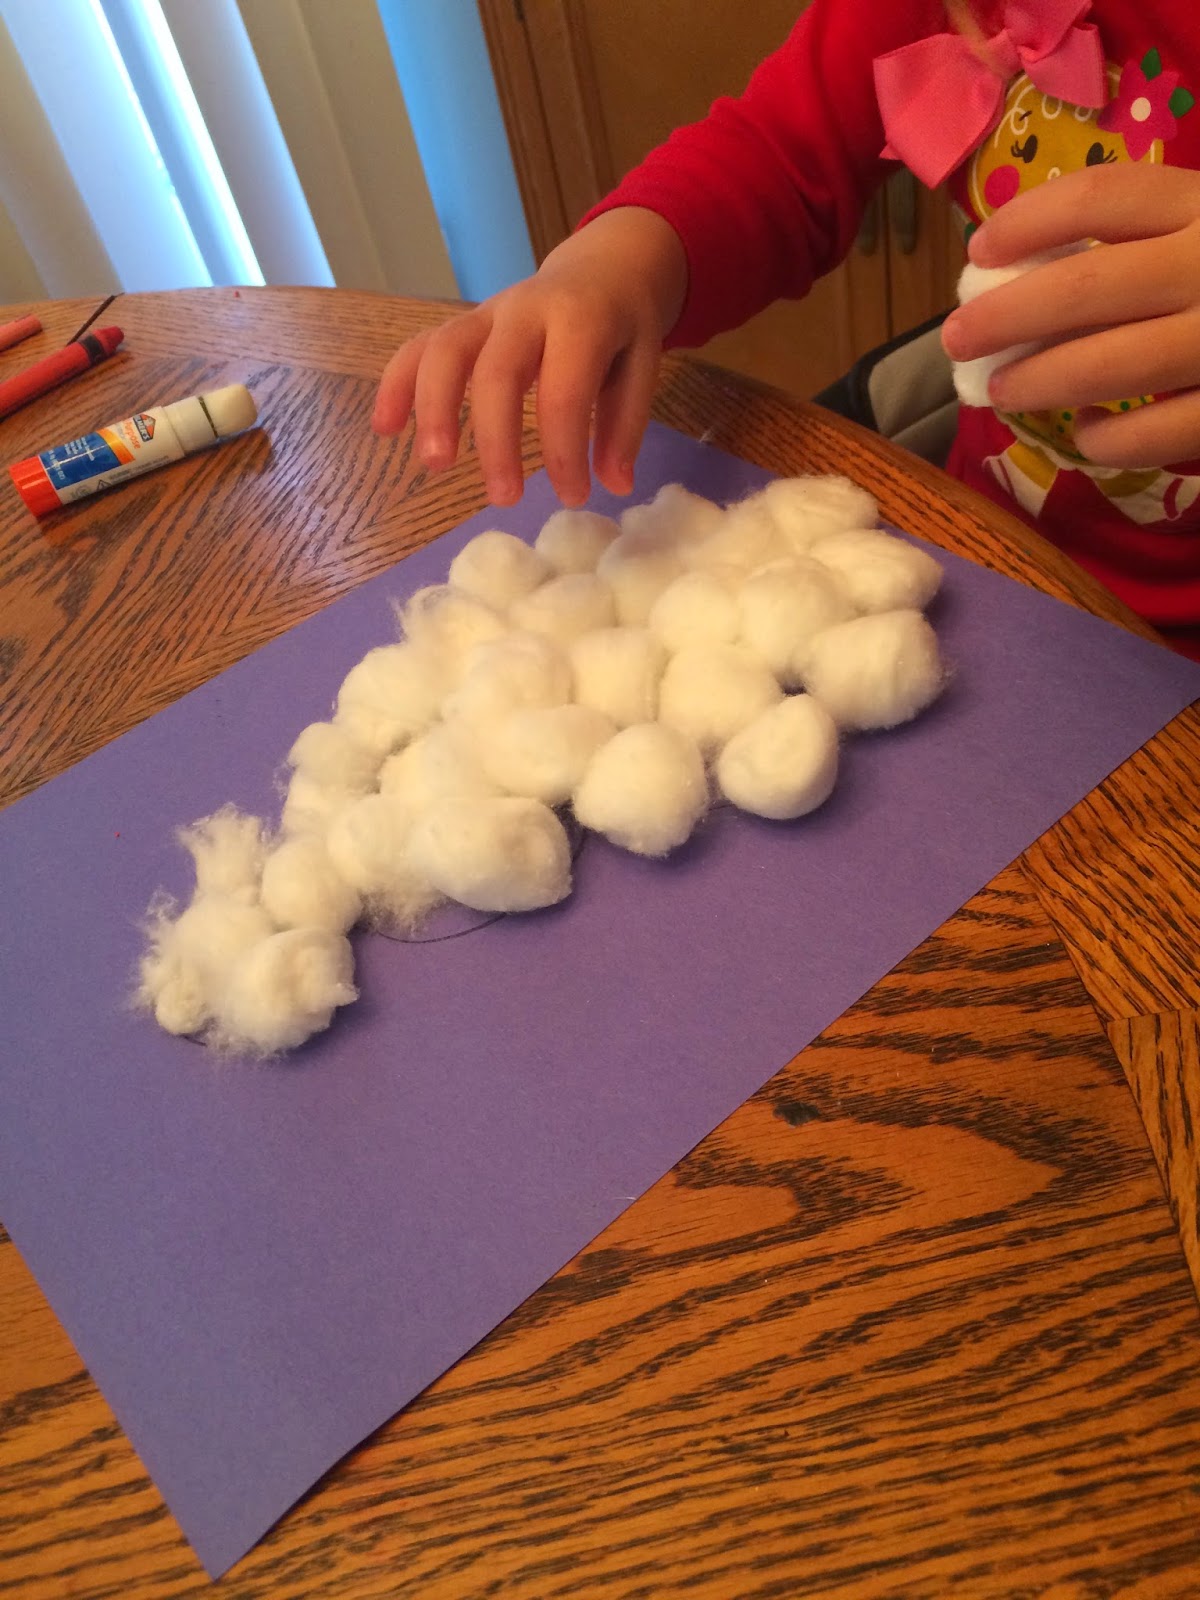 Speech Therapy Fun: Do You Want To Build A Snowman?